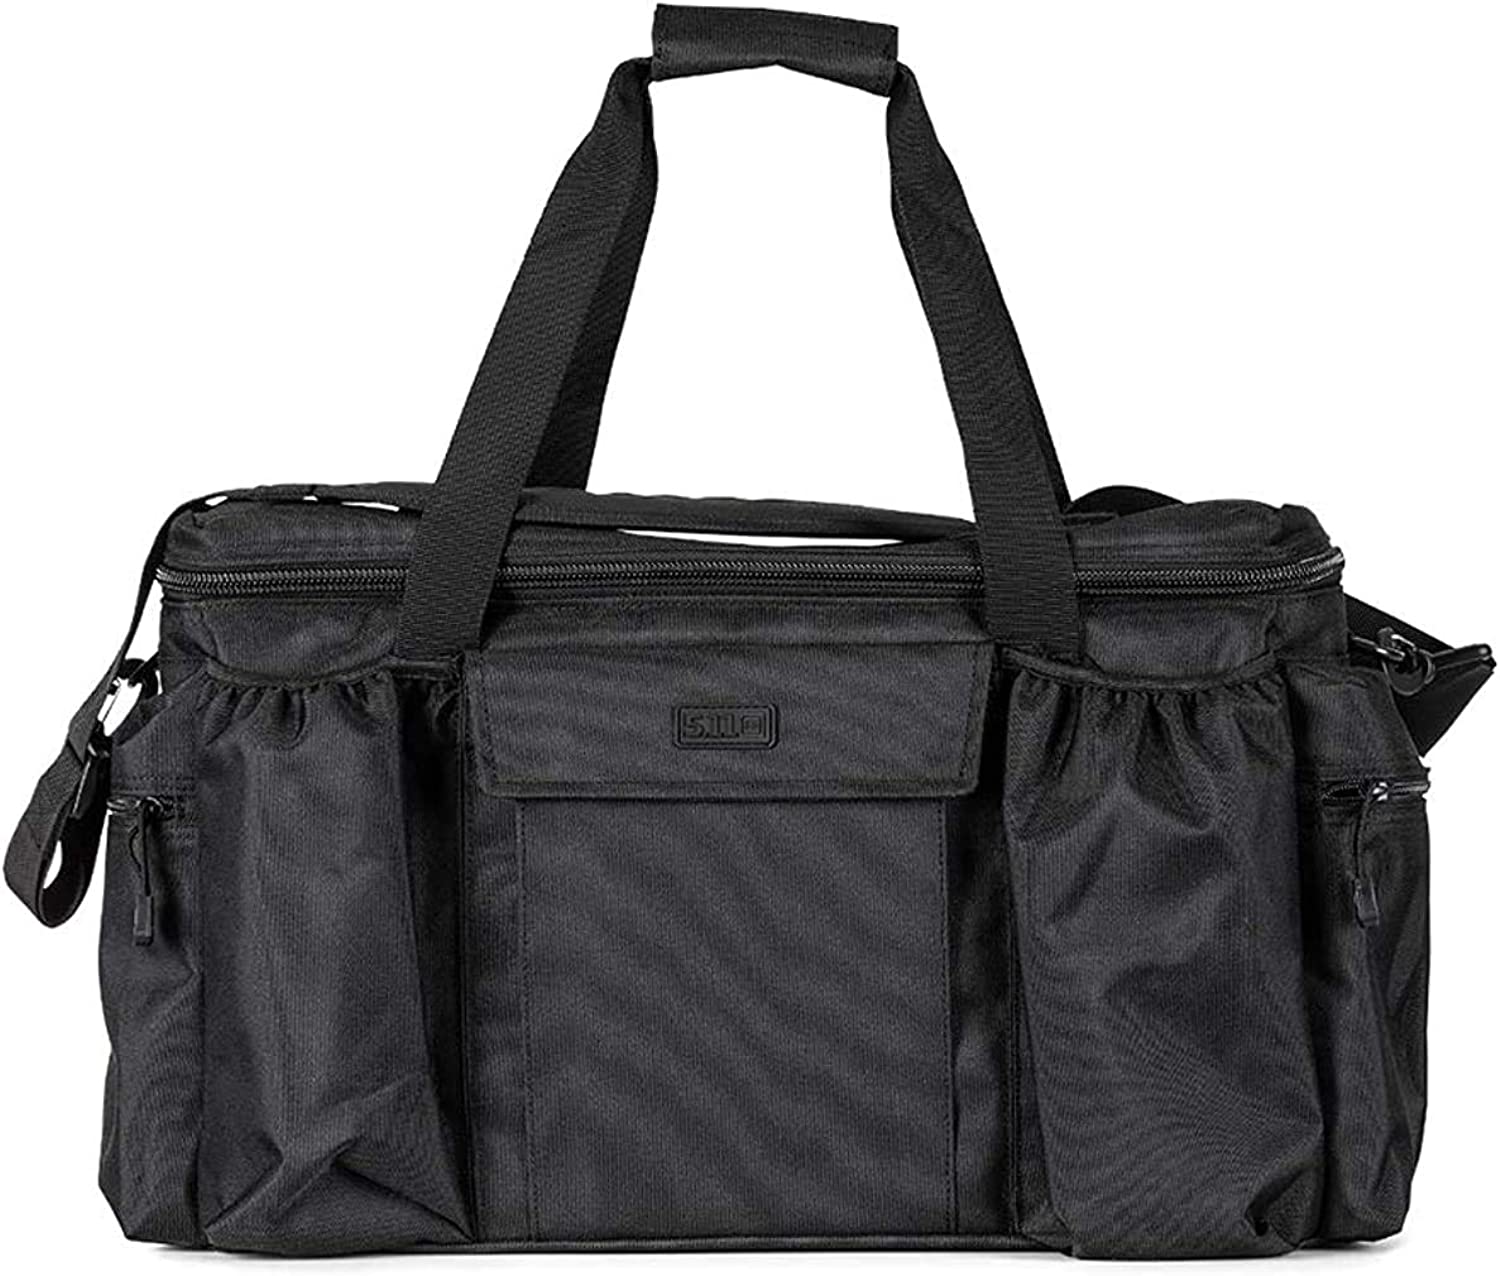 5.11 Tactical Patrol Ready 40 Liter Bag, Police Security Car Front Seat Organizer, Style 59012